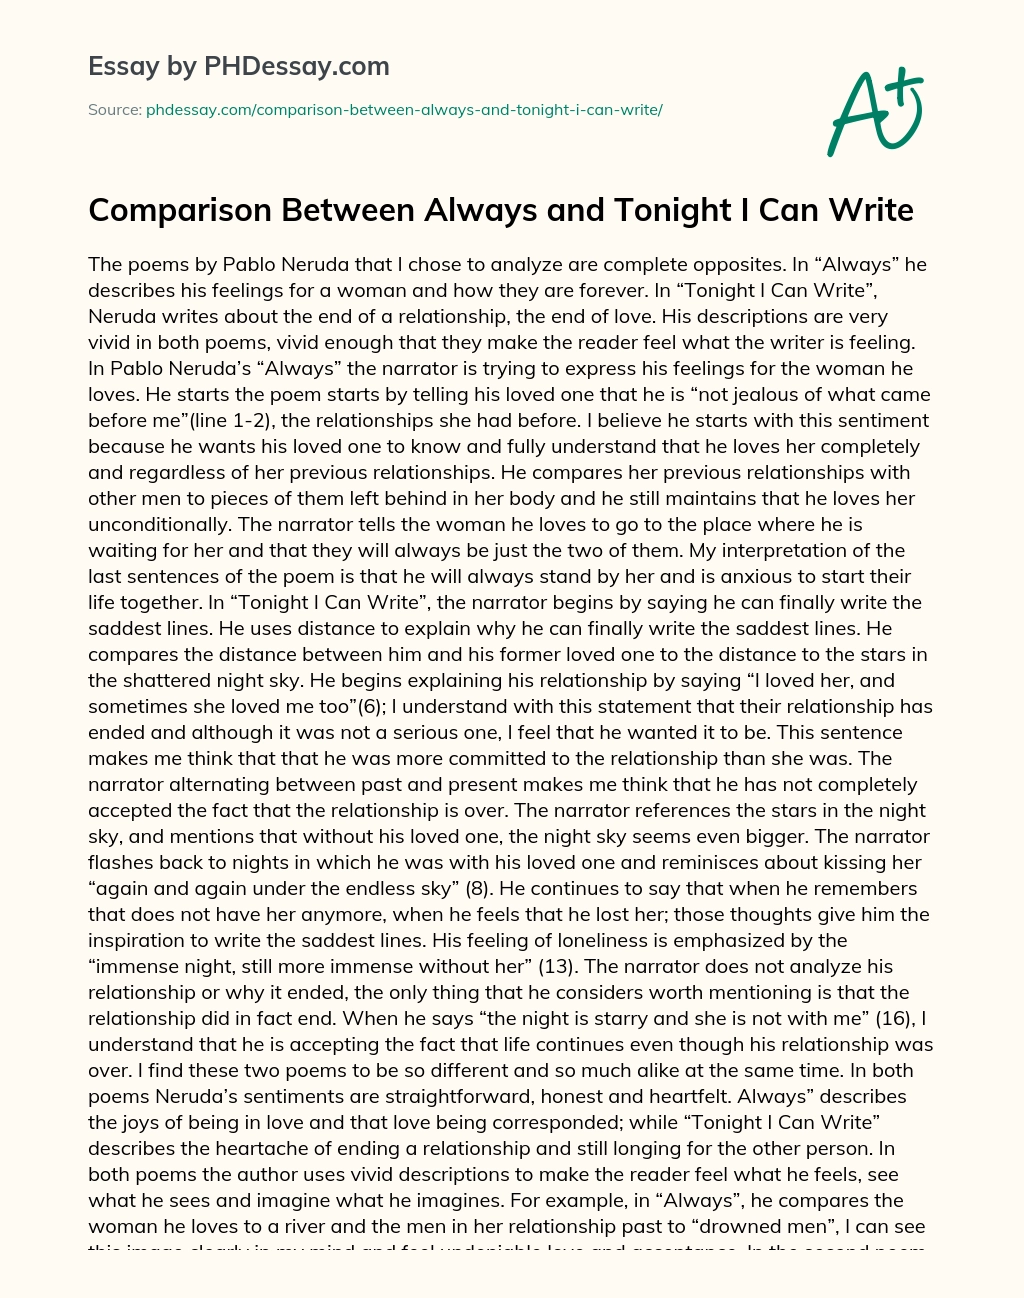 Comparison Between Always and Tonight I Can Write essay